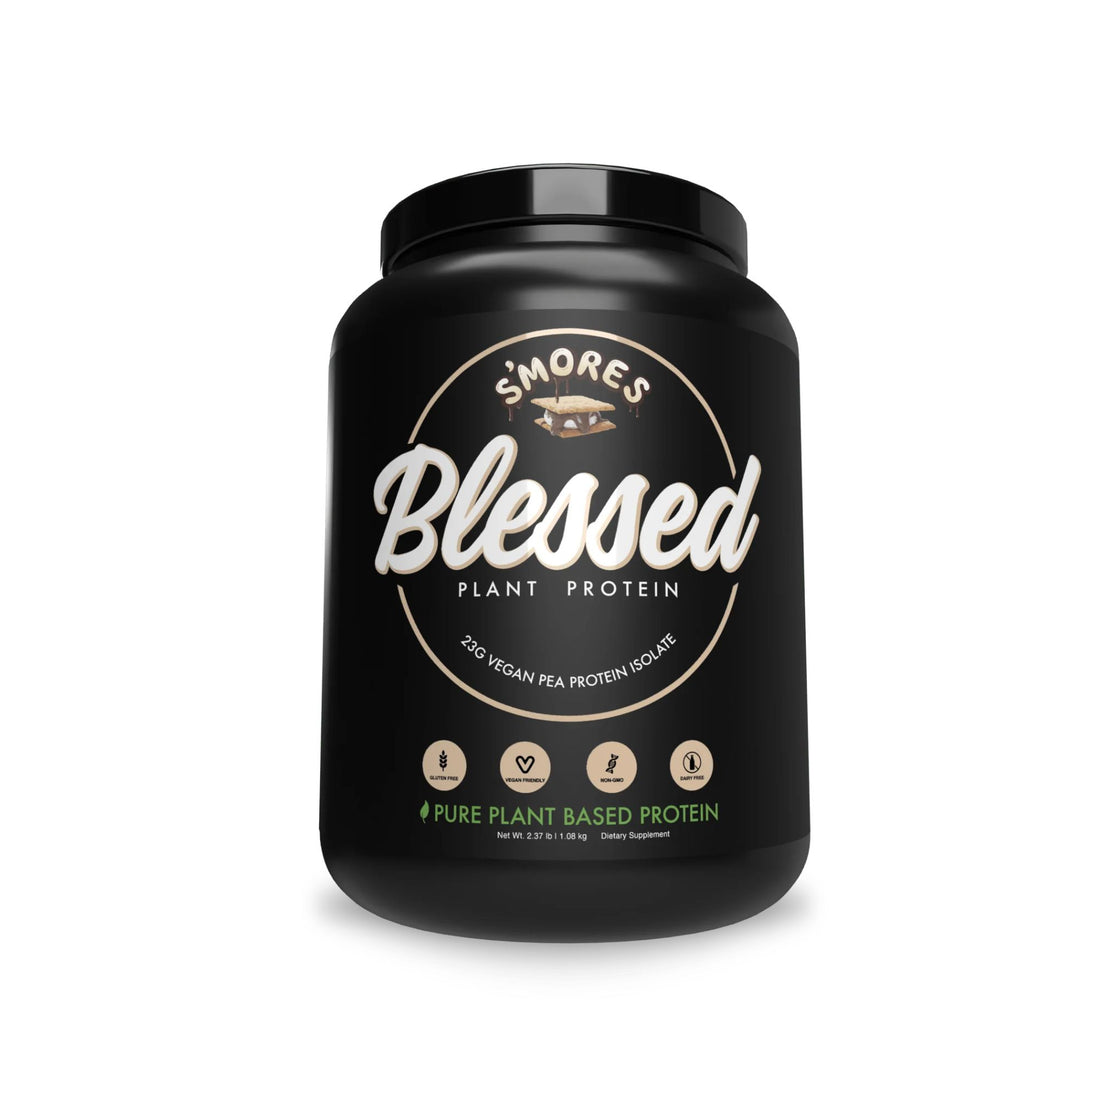 Blessed Protein - Smores Clearance